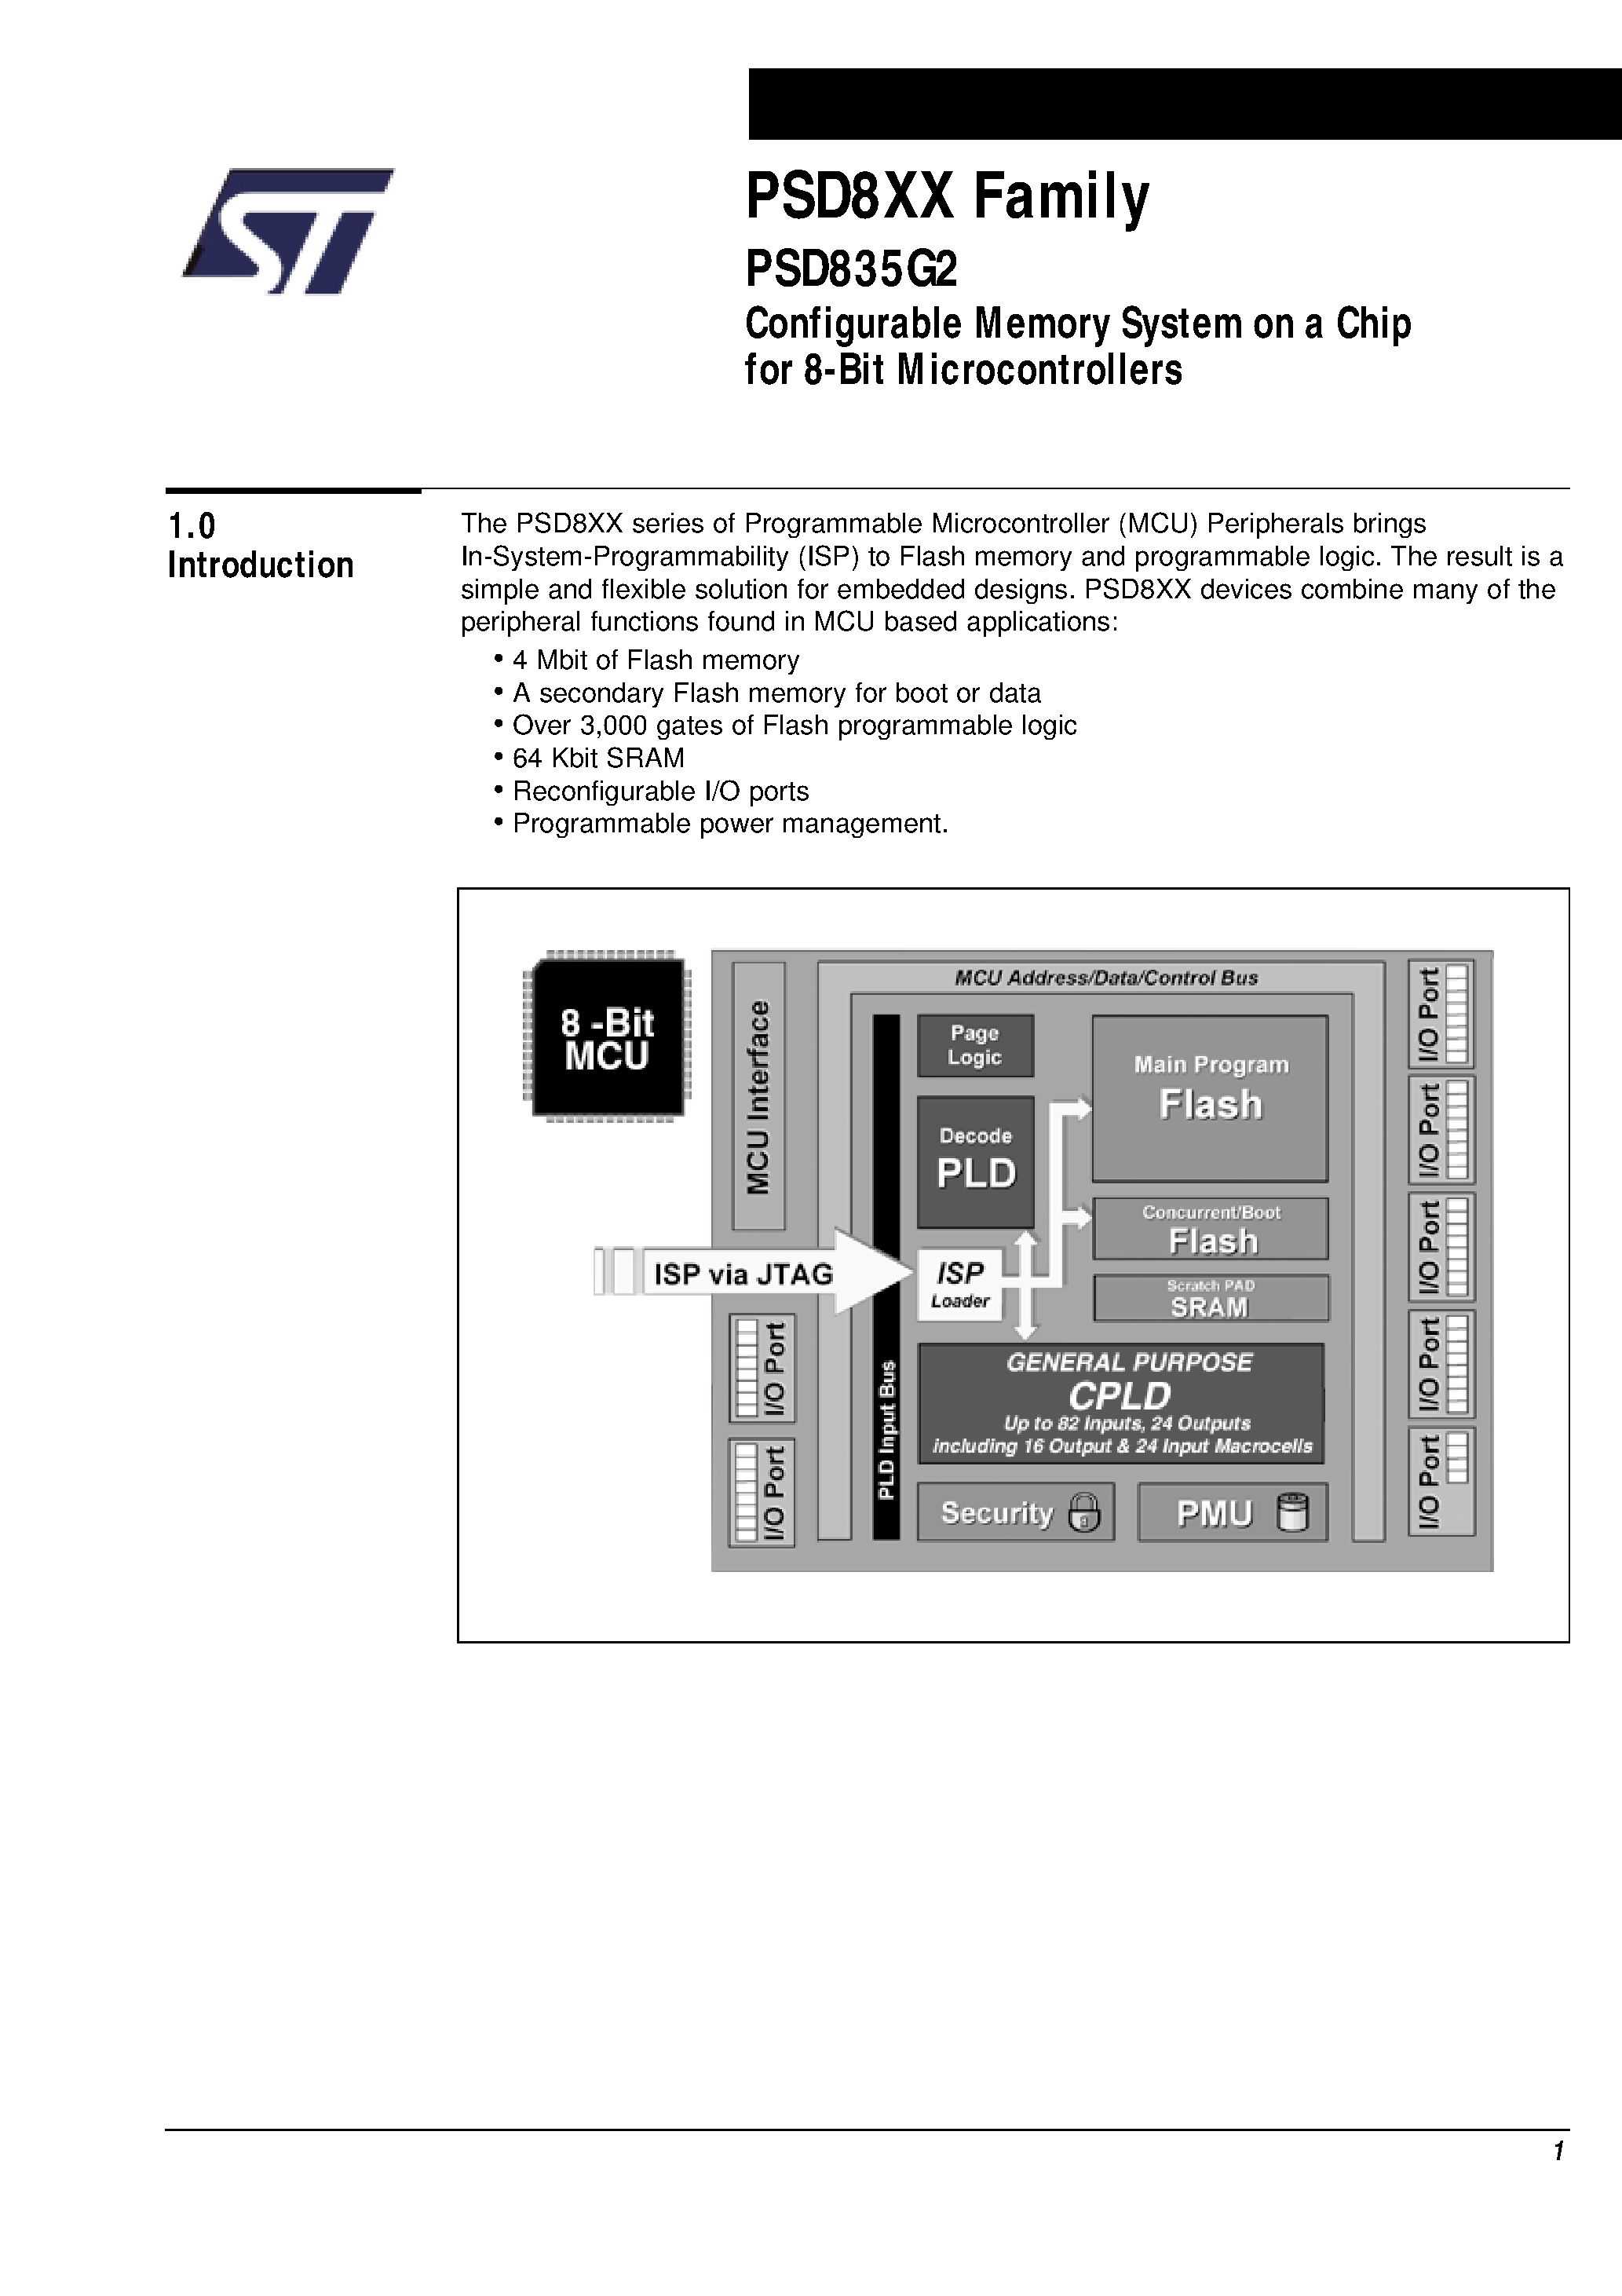 Datasheet PSD835F2-A-90M - Configurable Memory System on a Chip for 8-Bit Microcontrollers page 2